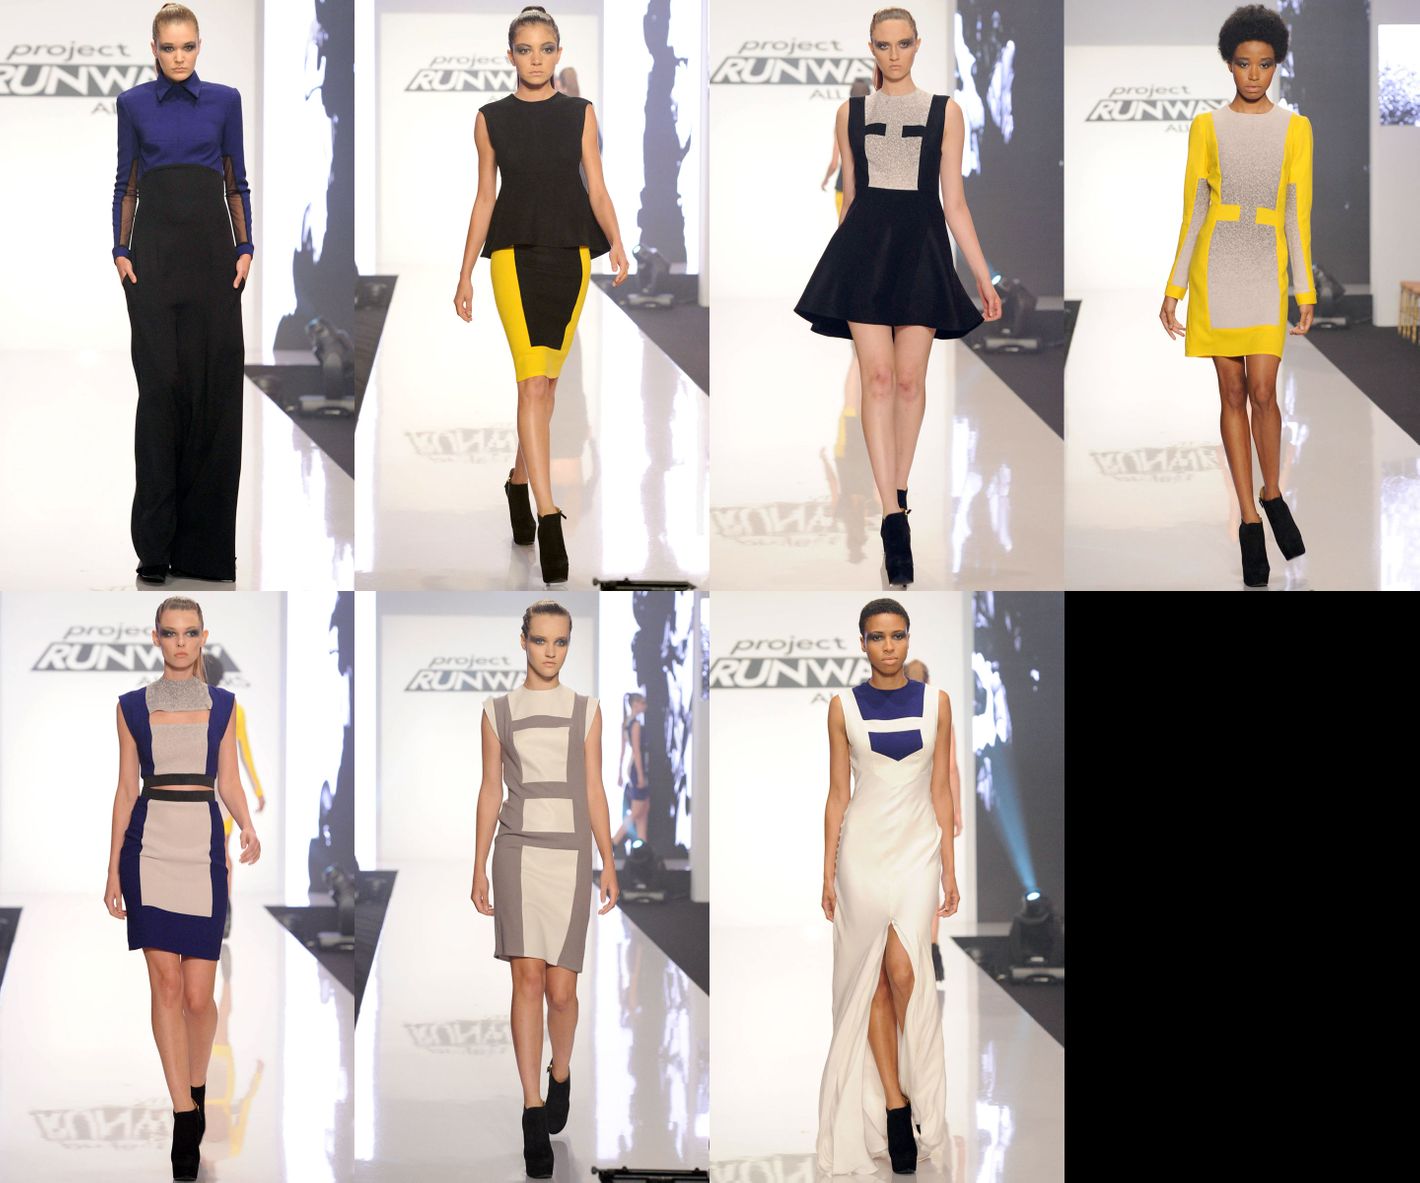 Every Single Look From the Project Runway Finale